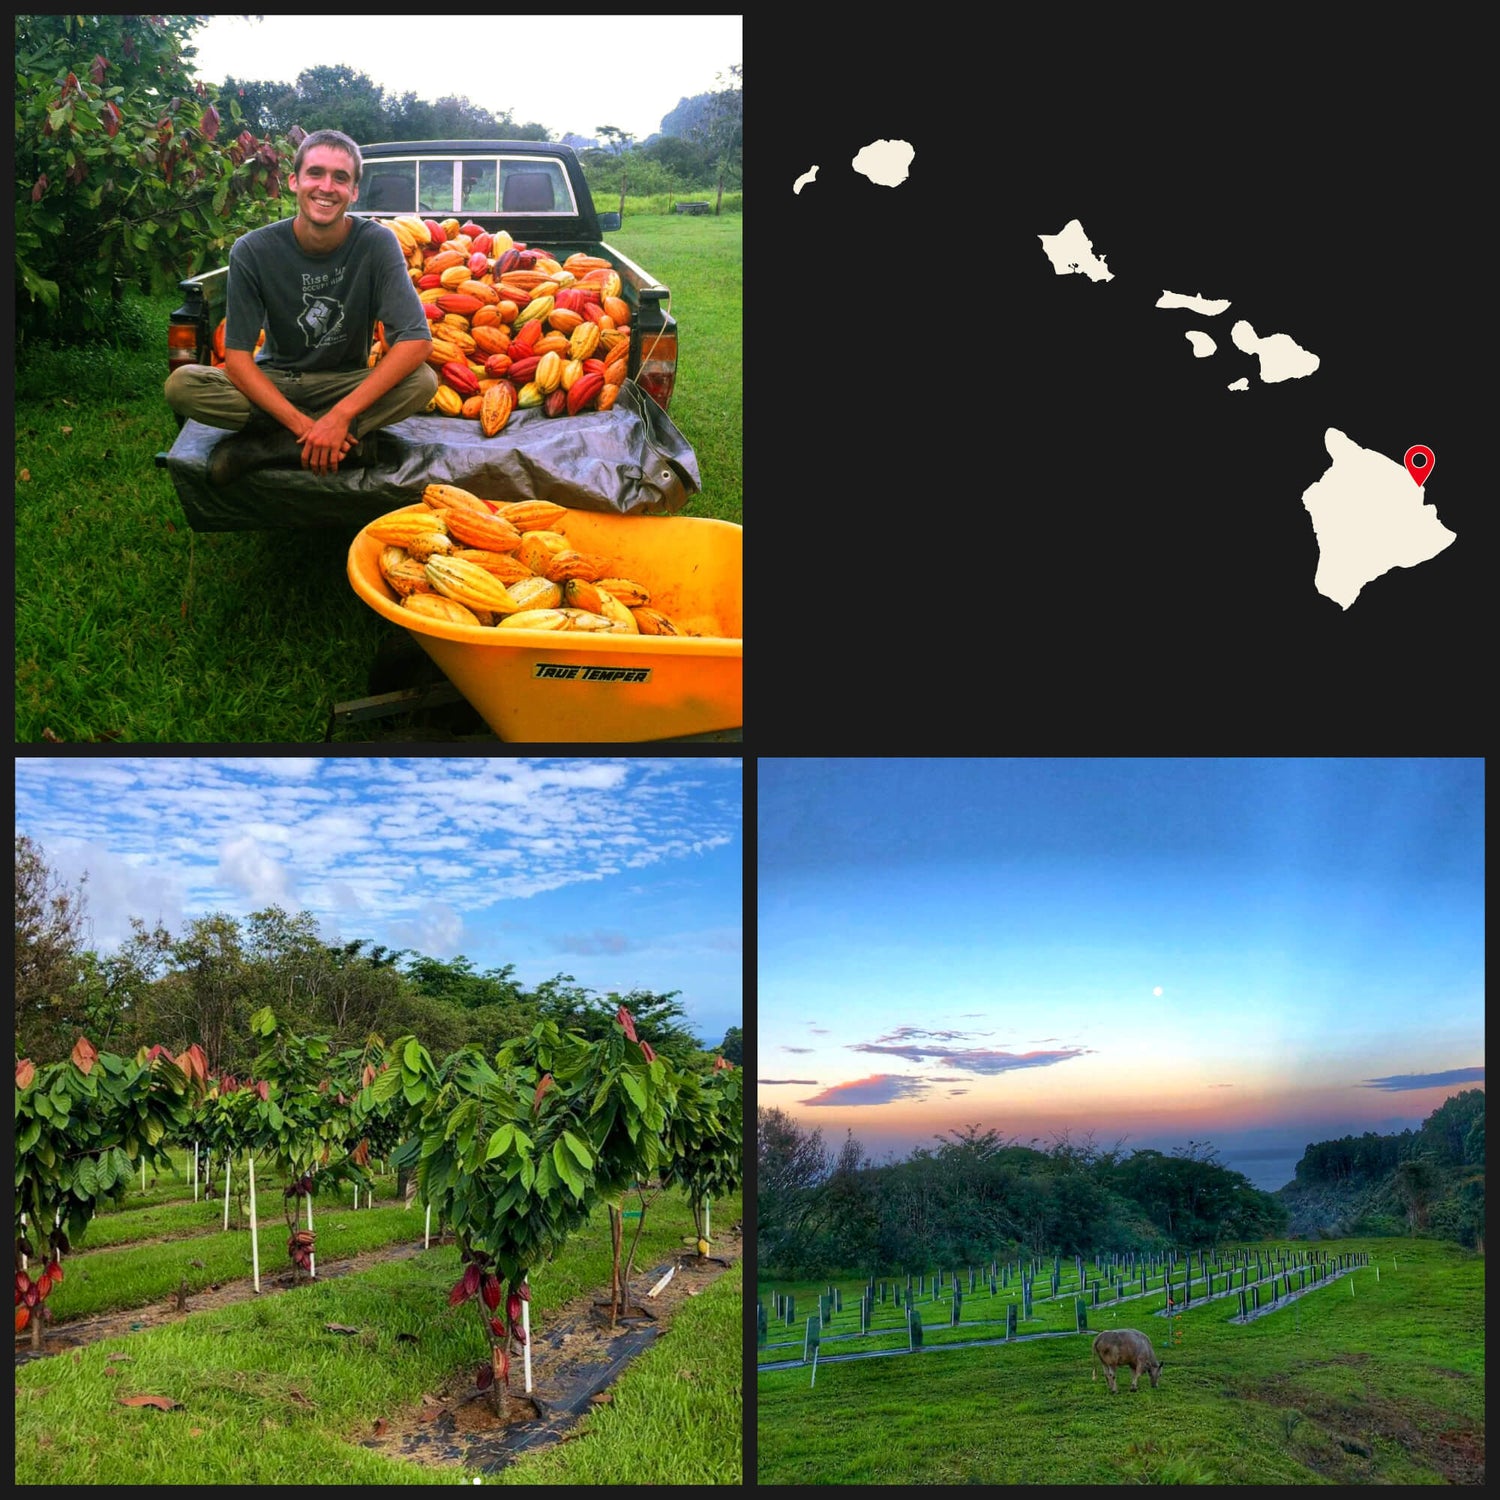 Images of man with cacao pods, cacao trees, farmland, and map of the Hawaiian islands